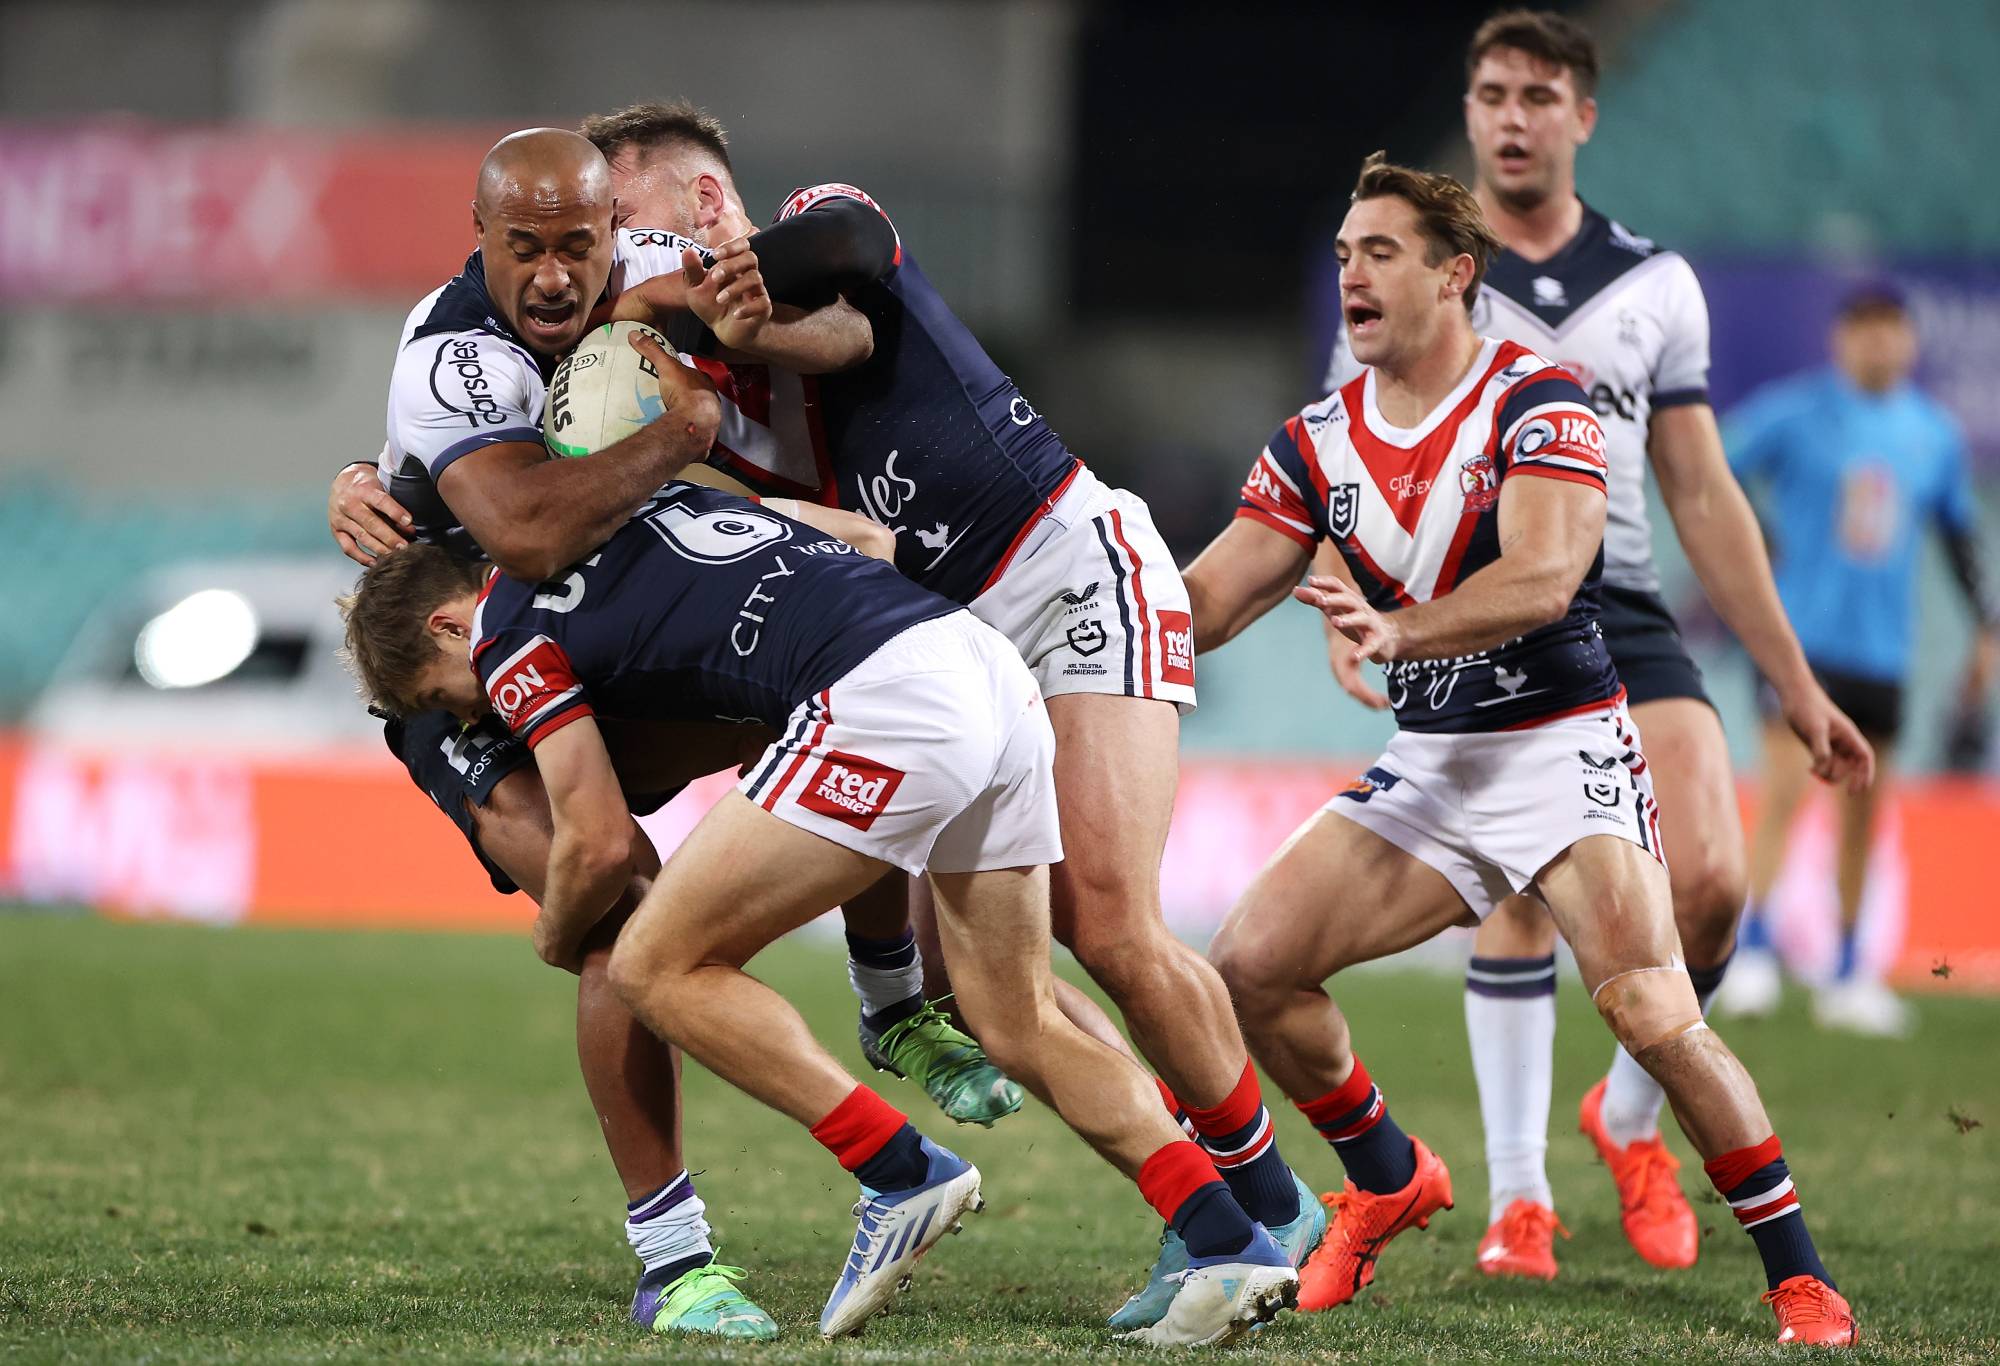 SYDNEY, AUSTRALIA - JUNE 11: Felise Kaufusi of the Storm is tackled during the round 14 NRL match between the Sydney Roosters and the Melbourne Storm at Sydney Cricket Ground, on June 11, 2022, in Sydney, Australia. (Photo by Mark Kolbe/Getty Images)